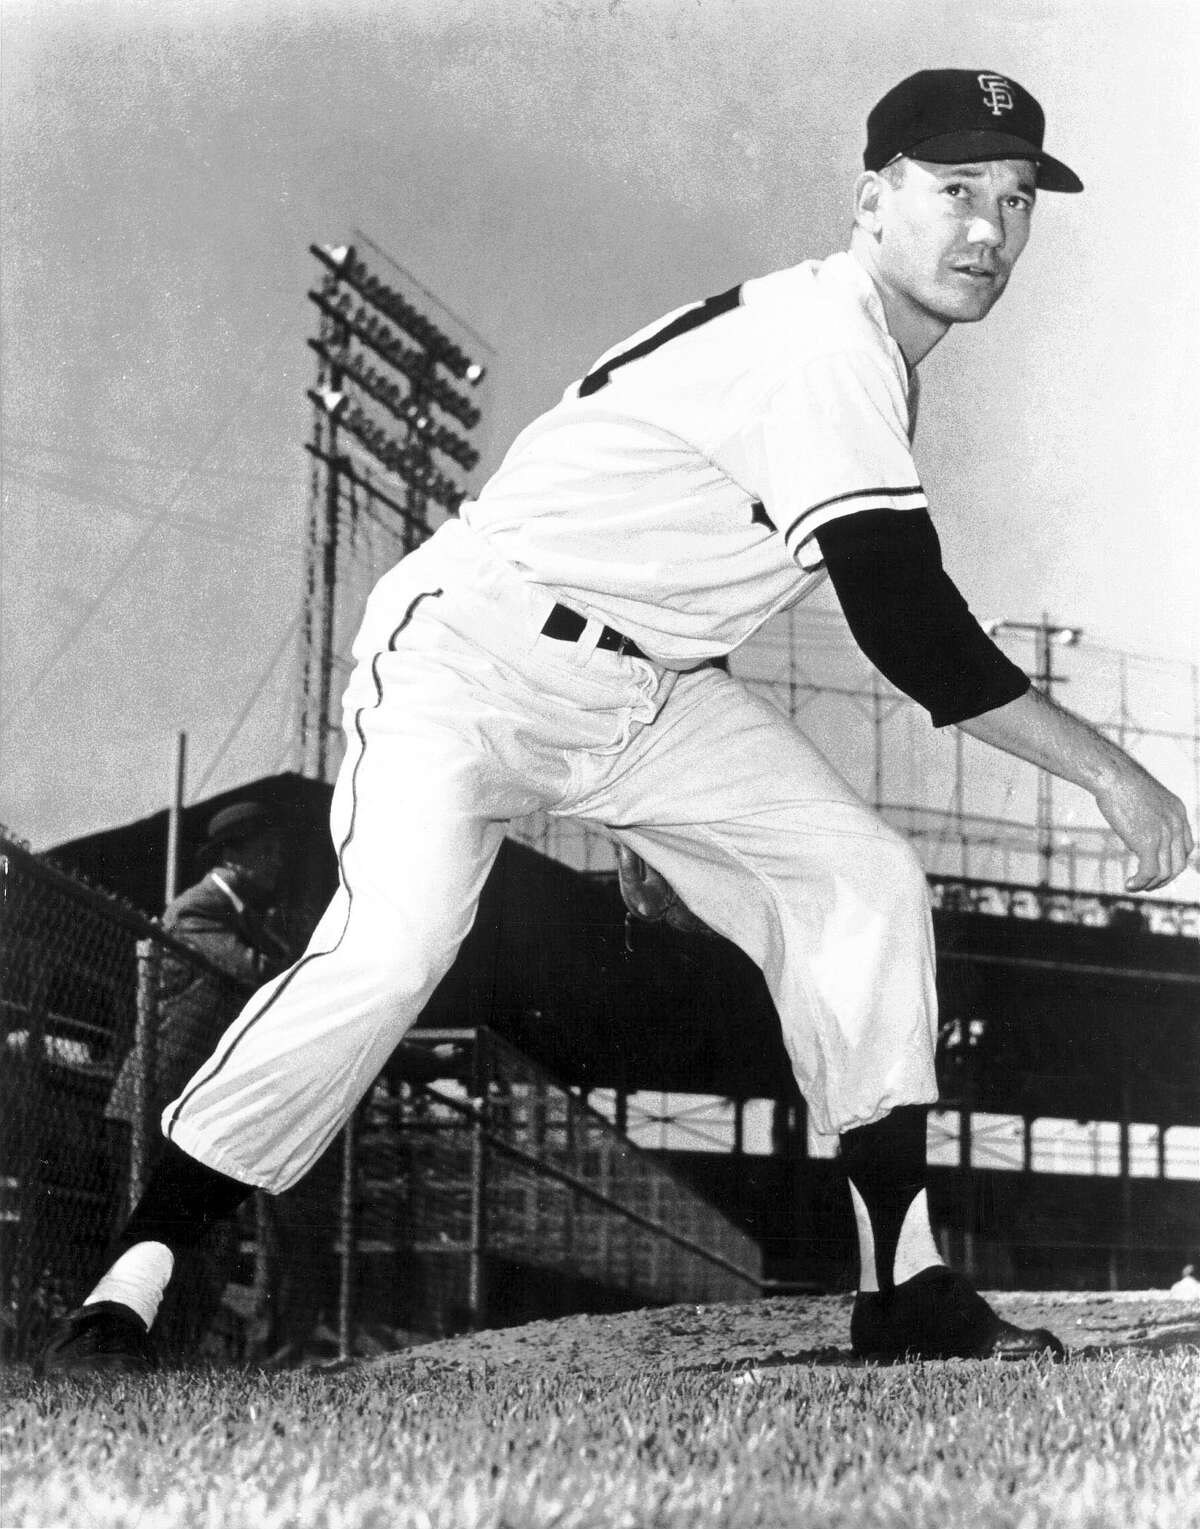 Stu Miller had 154 career saves, leading the National League and American League in one season each. He pitched for the Giants from 1957 to 1962 and won a World Series with the Orioles in 1966.